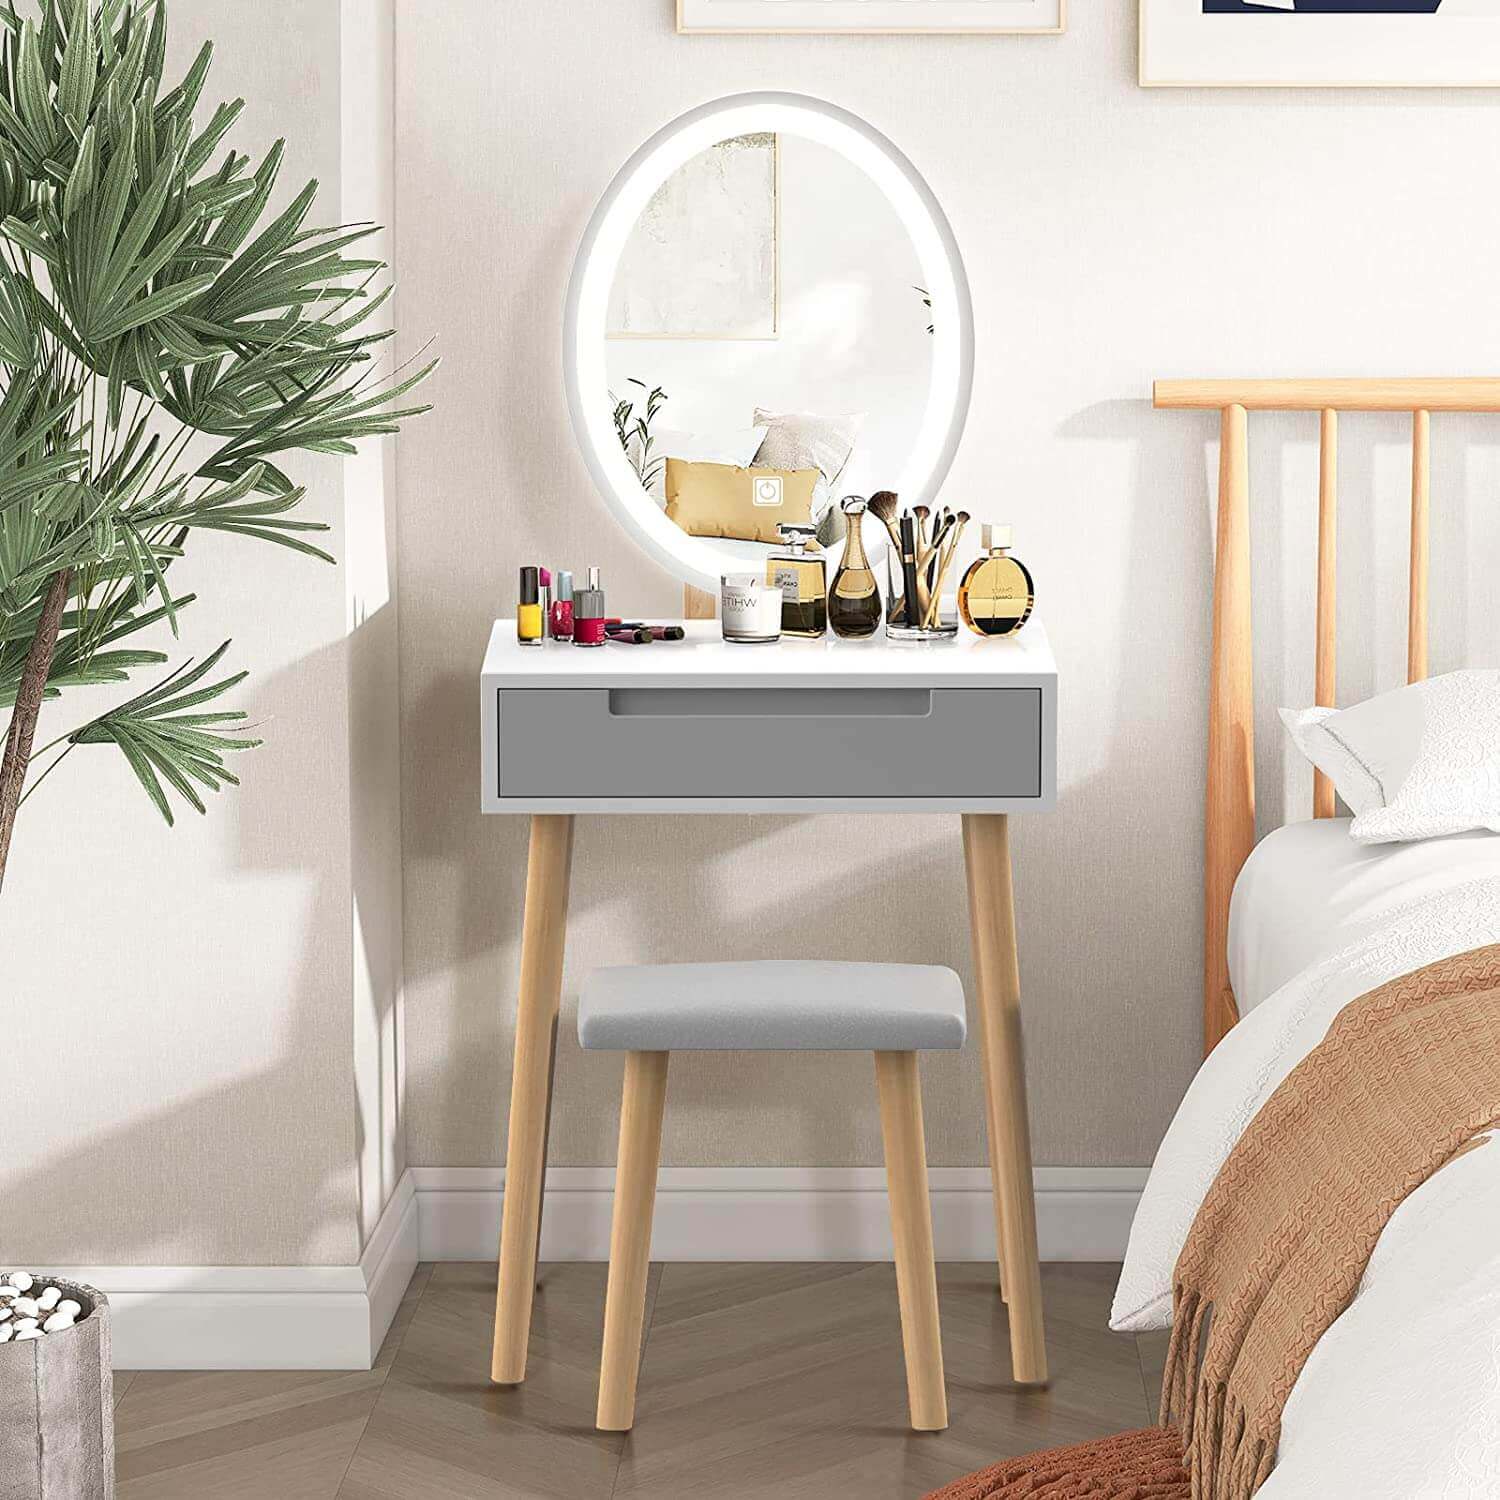 Makeup Vanity Table Set with 3 Adjustable Lighted Mirror Stool HW1151GY display in bedroom